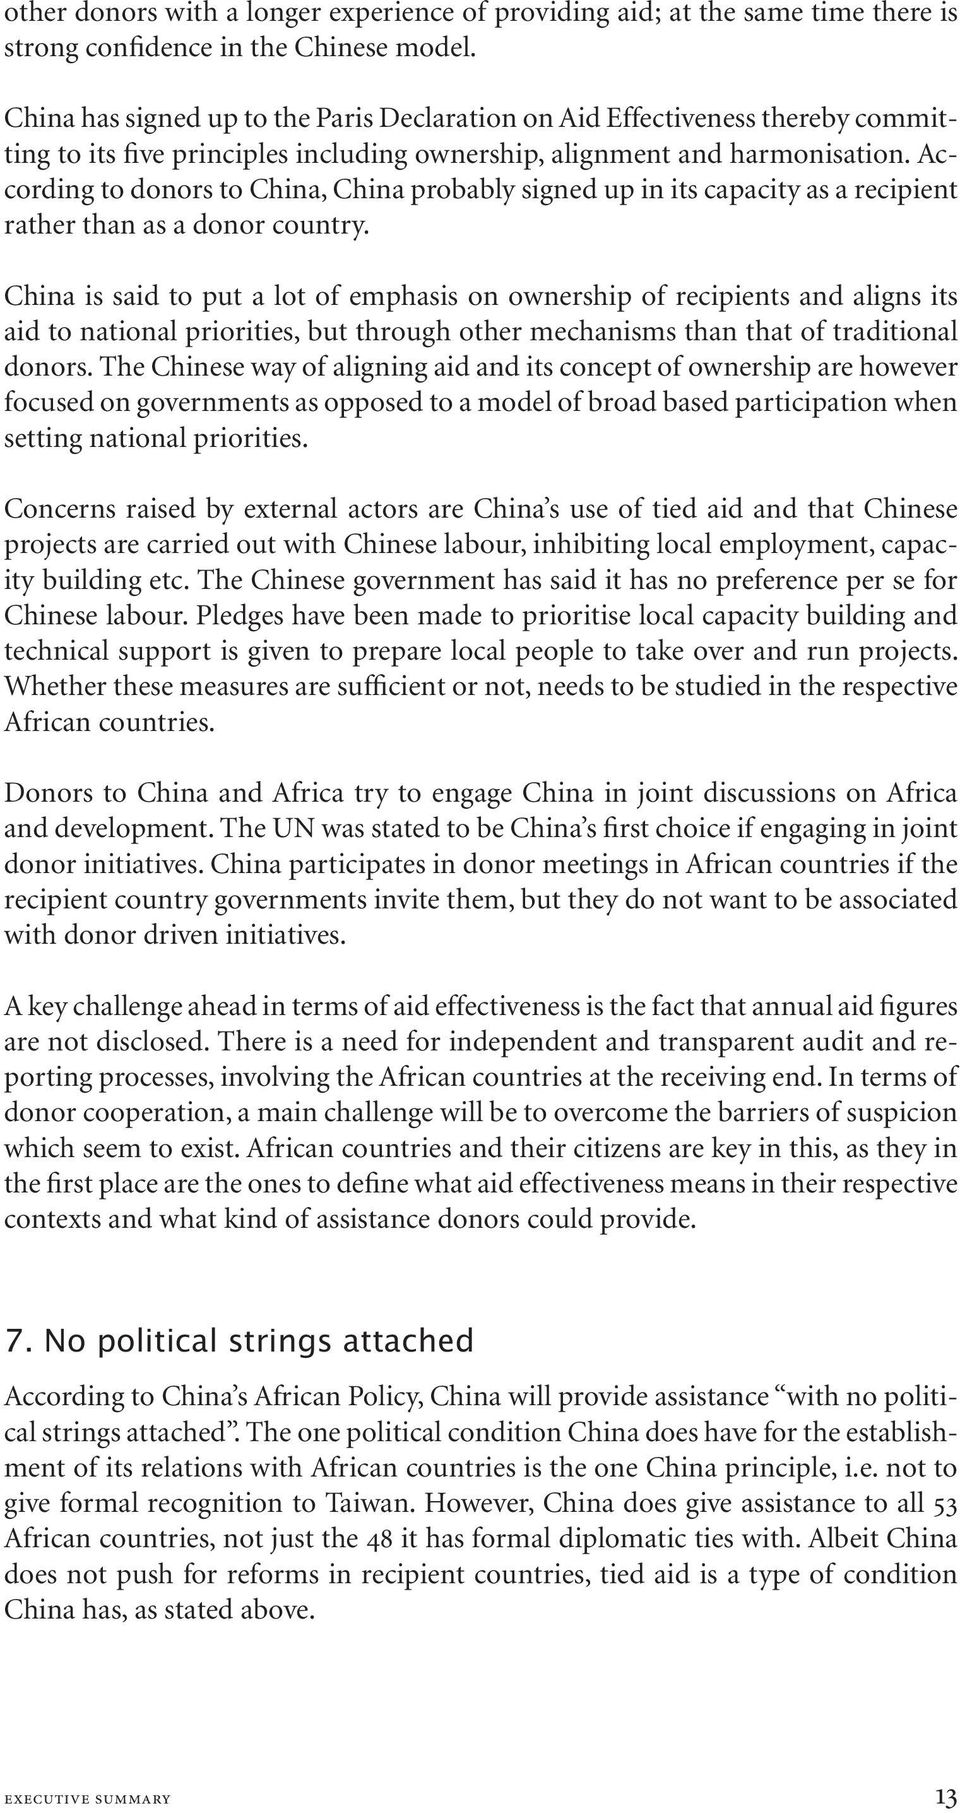 According to donors to China, China probably signed up in its capacity as a recipient rather than as a donor country.